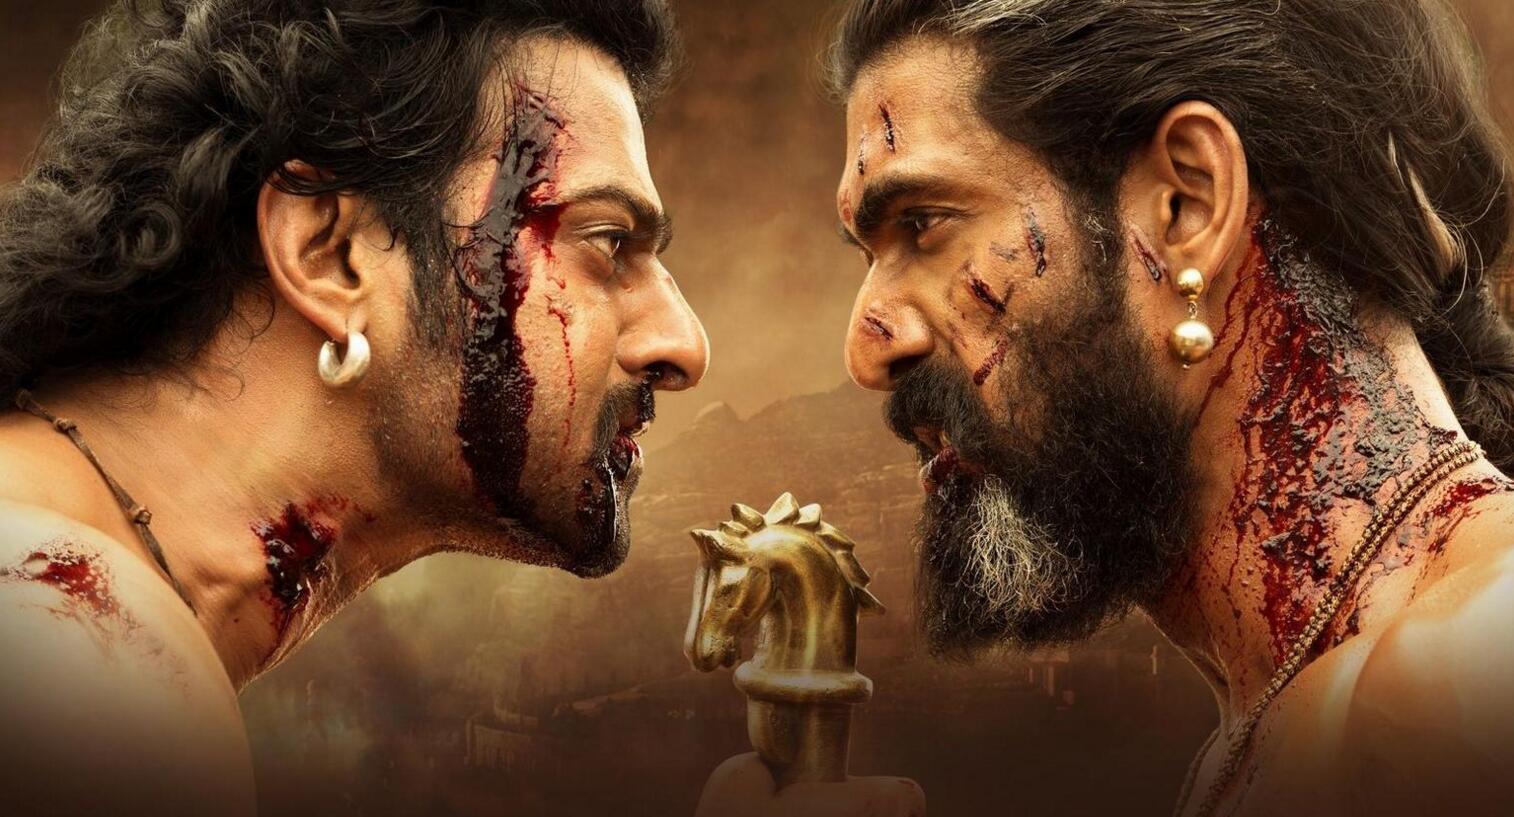 “Baahubali 2: The Conclusion” Rendered by Fox Renderfarm Became The Highest-grossing Indian Film in History